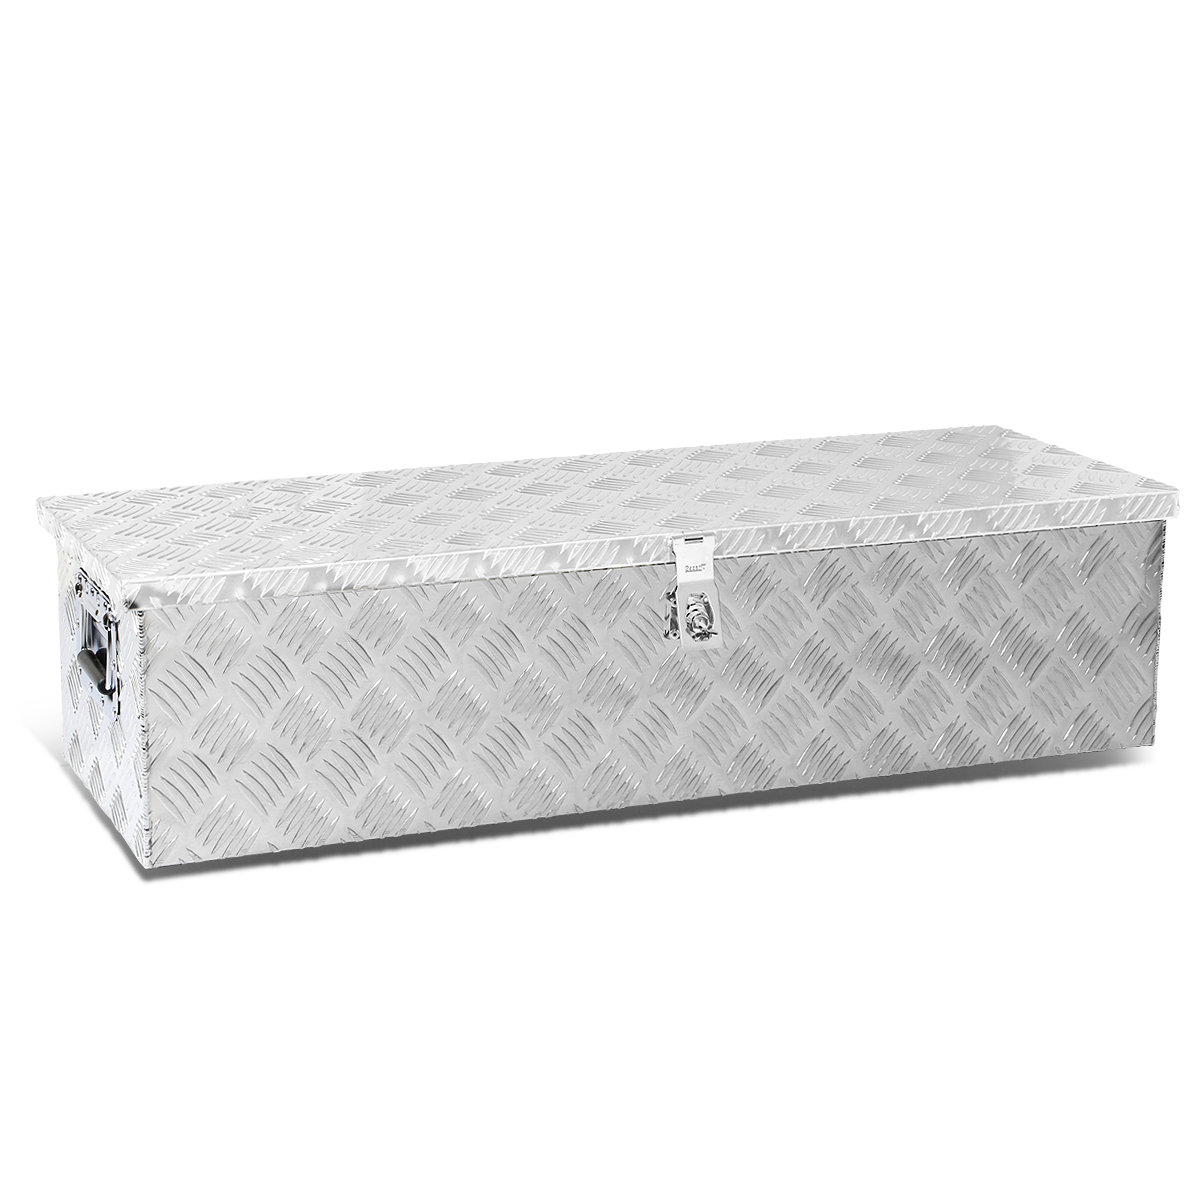 Truck Bed Storage Tool Box WFX Utility Finish: Silver